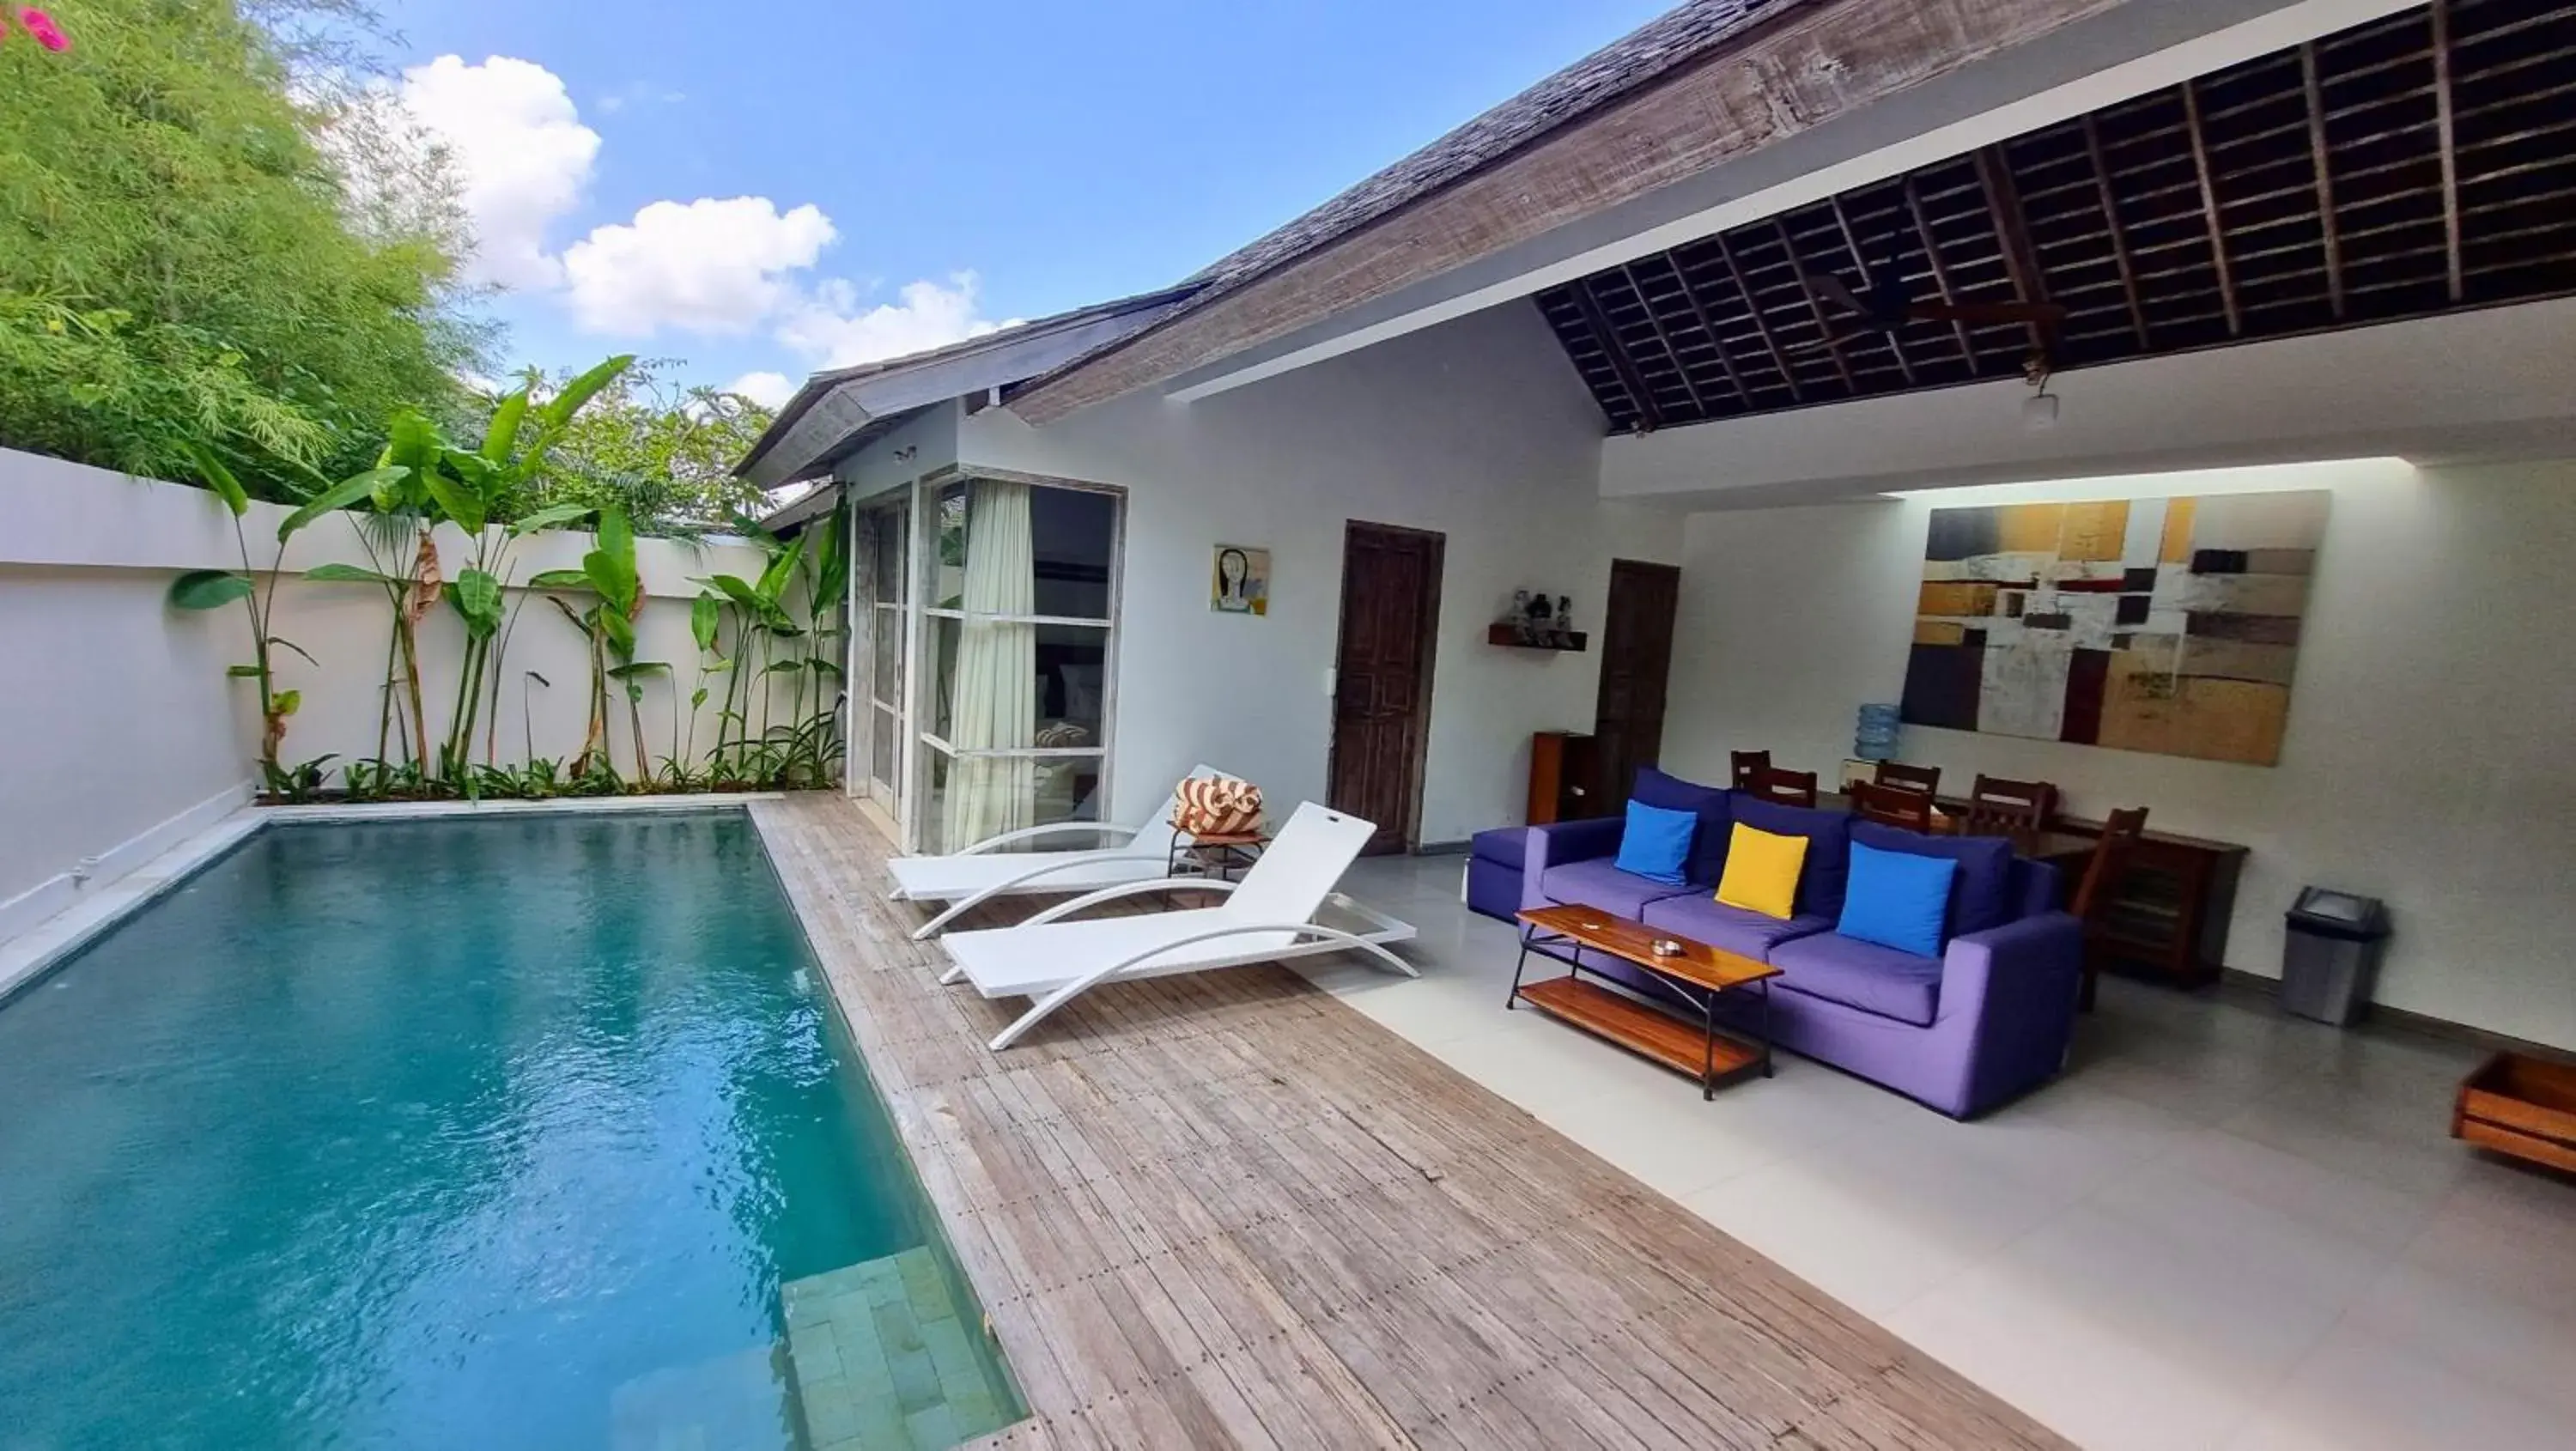 Property building, Swimming Pool in The Decks Bali